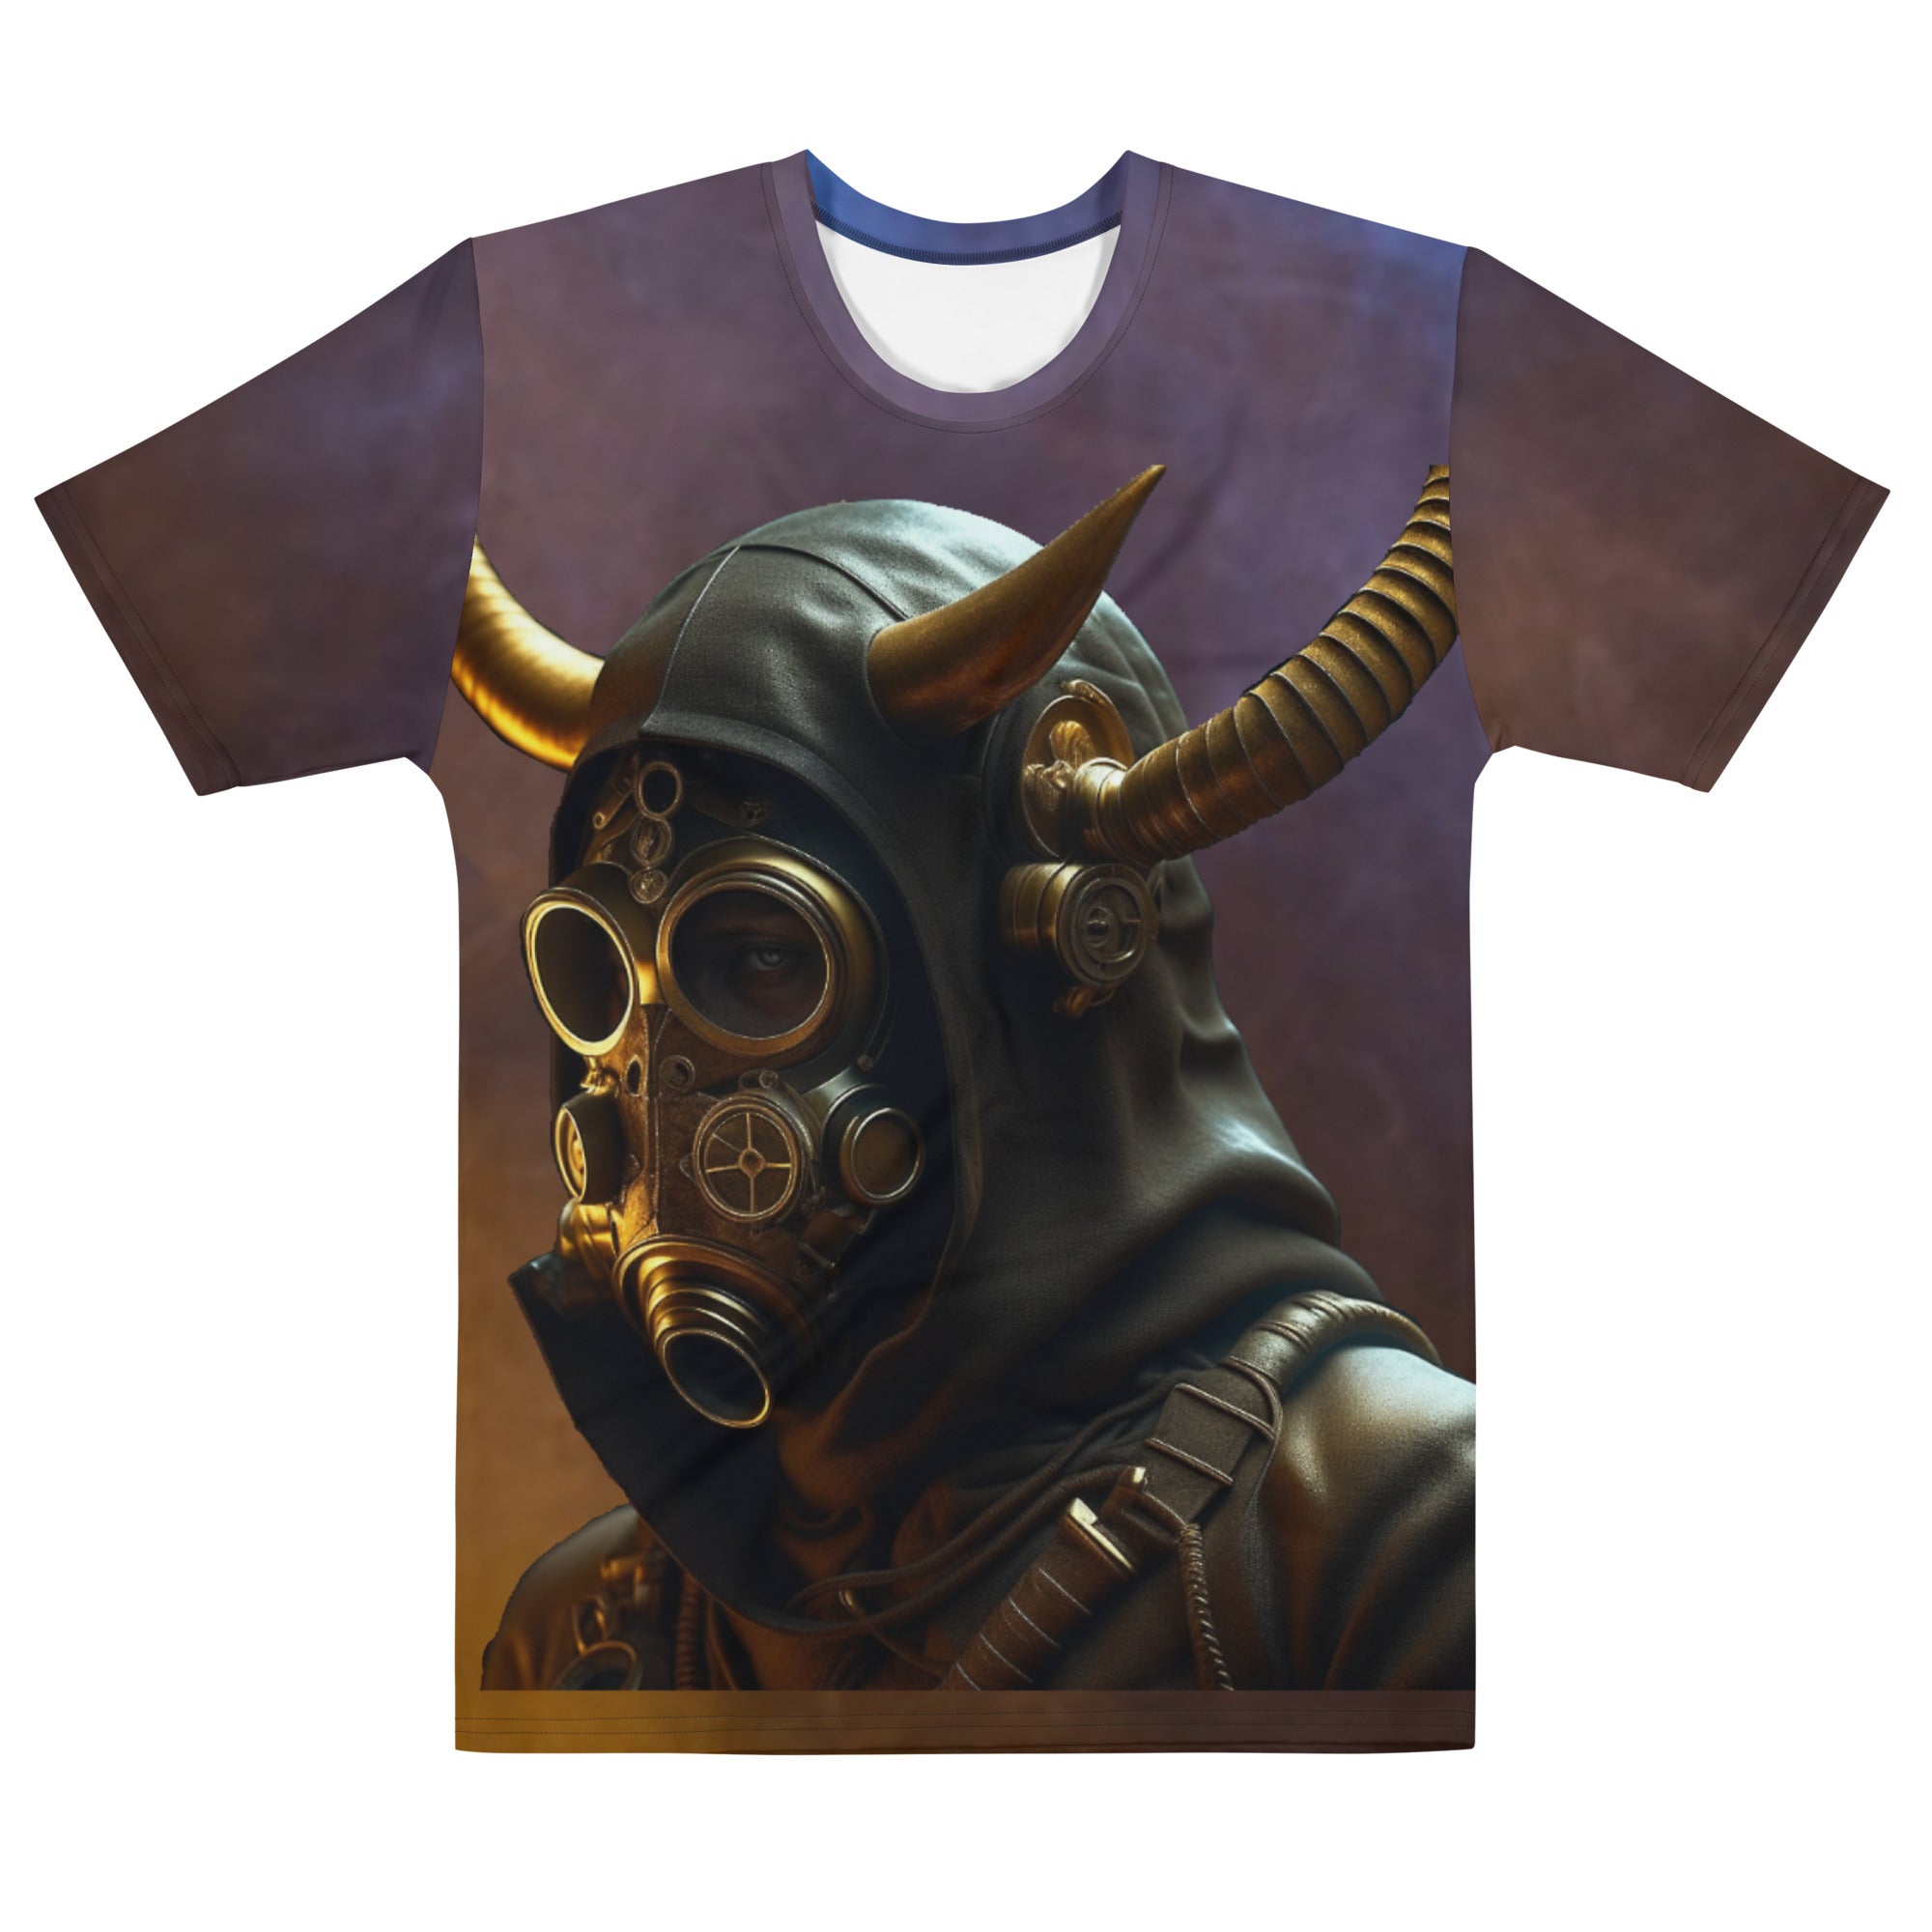 This RAVER HARD DANCE FESTIVAL T-SHIRT is a perfect choice for hard dance music lovers. Featuring a detailed steam punk figure design and made with premium quality material, this stylish t-shirt is sure to keep you comfortable while looking great.